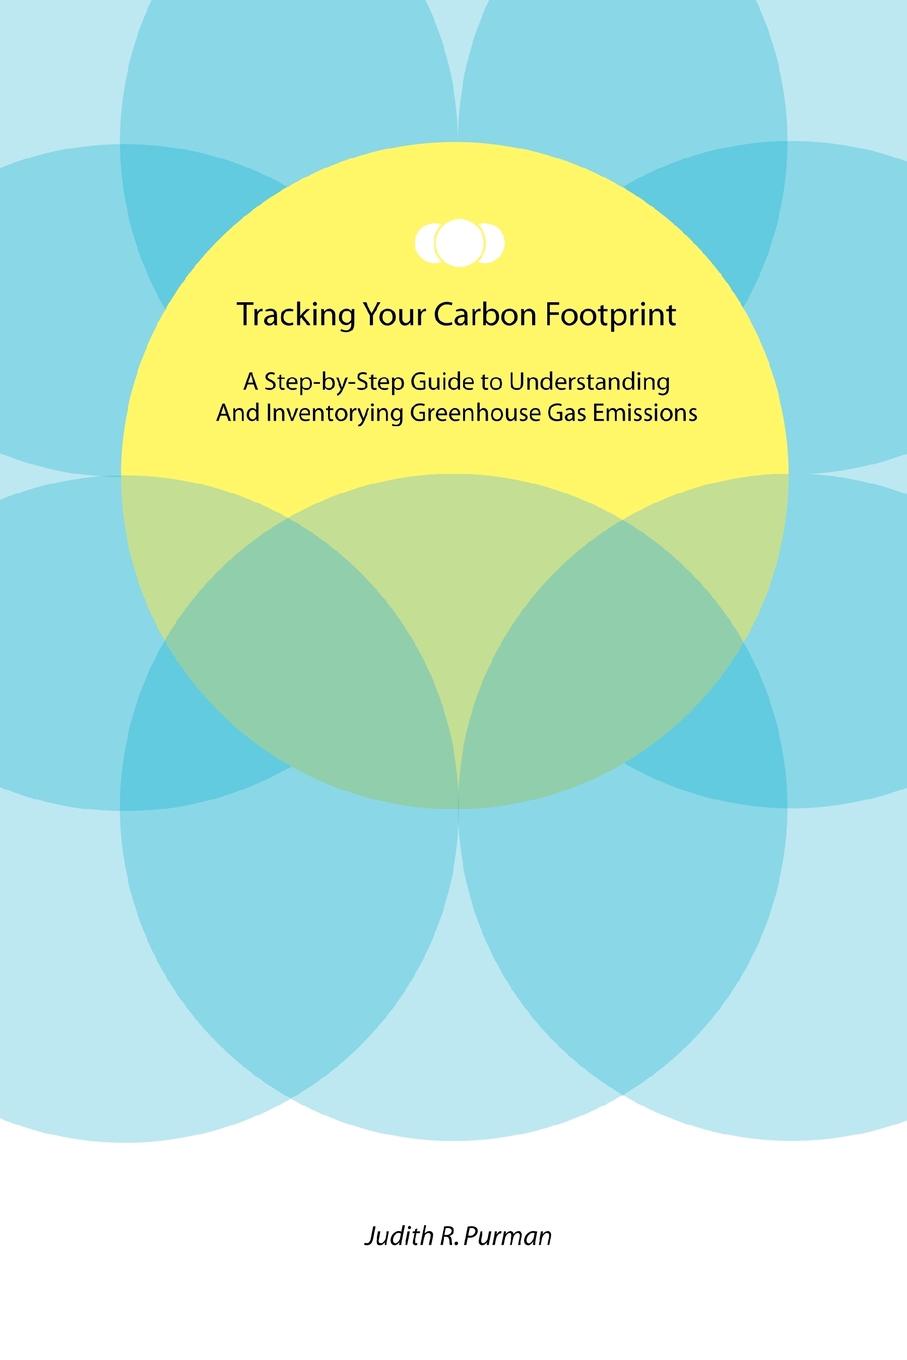 Tracking Your Carbon Footprint. A Step-By-Step Guide to Understanding and Inventorying Greenhouse Gas Emissions